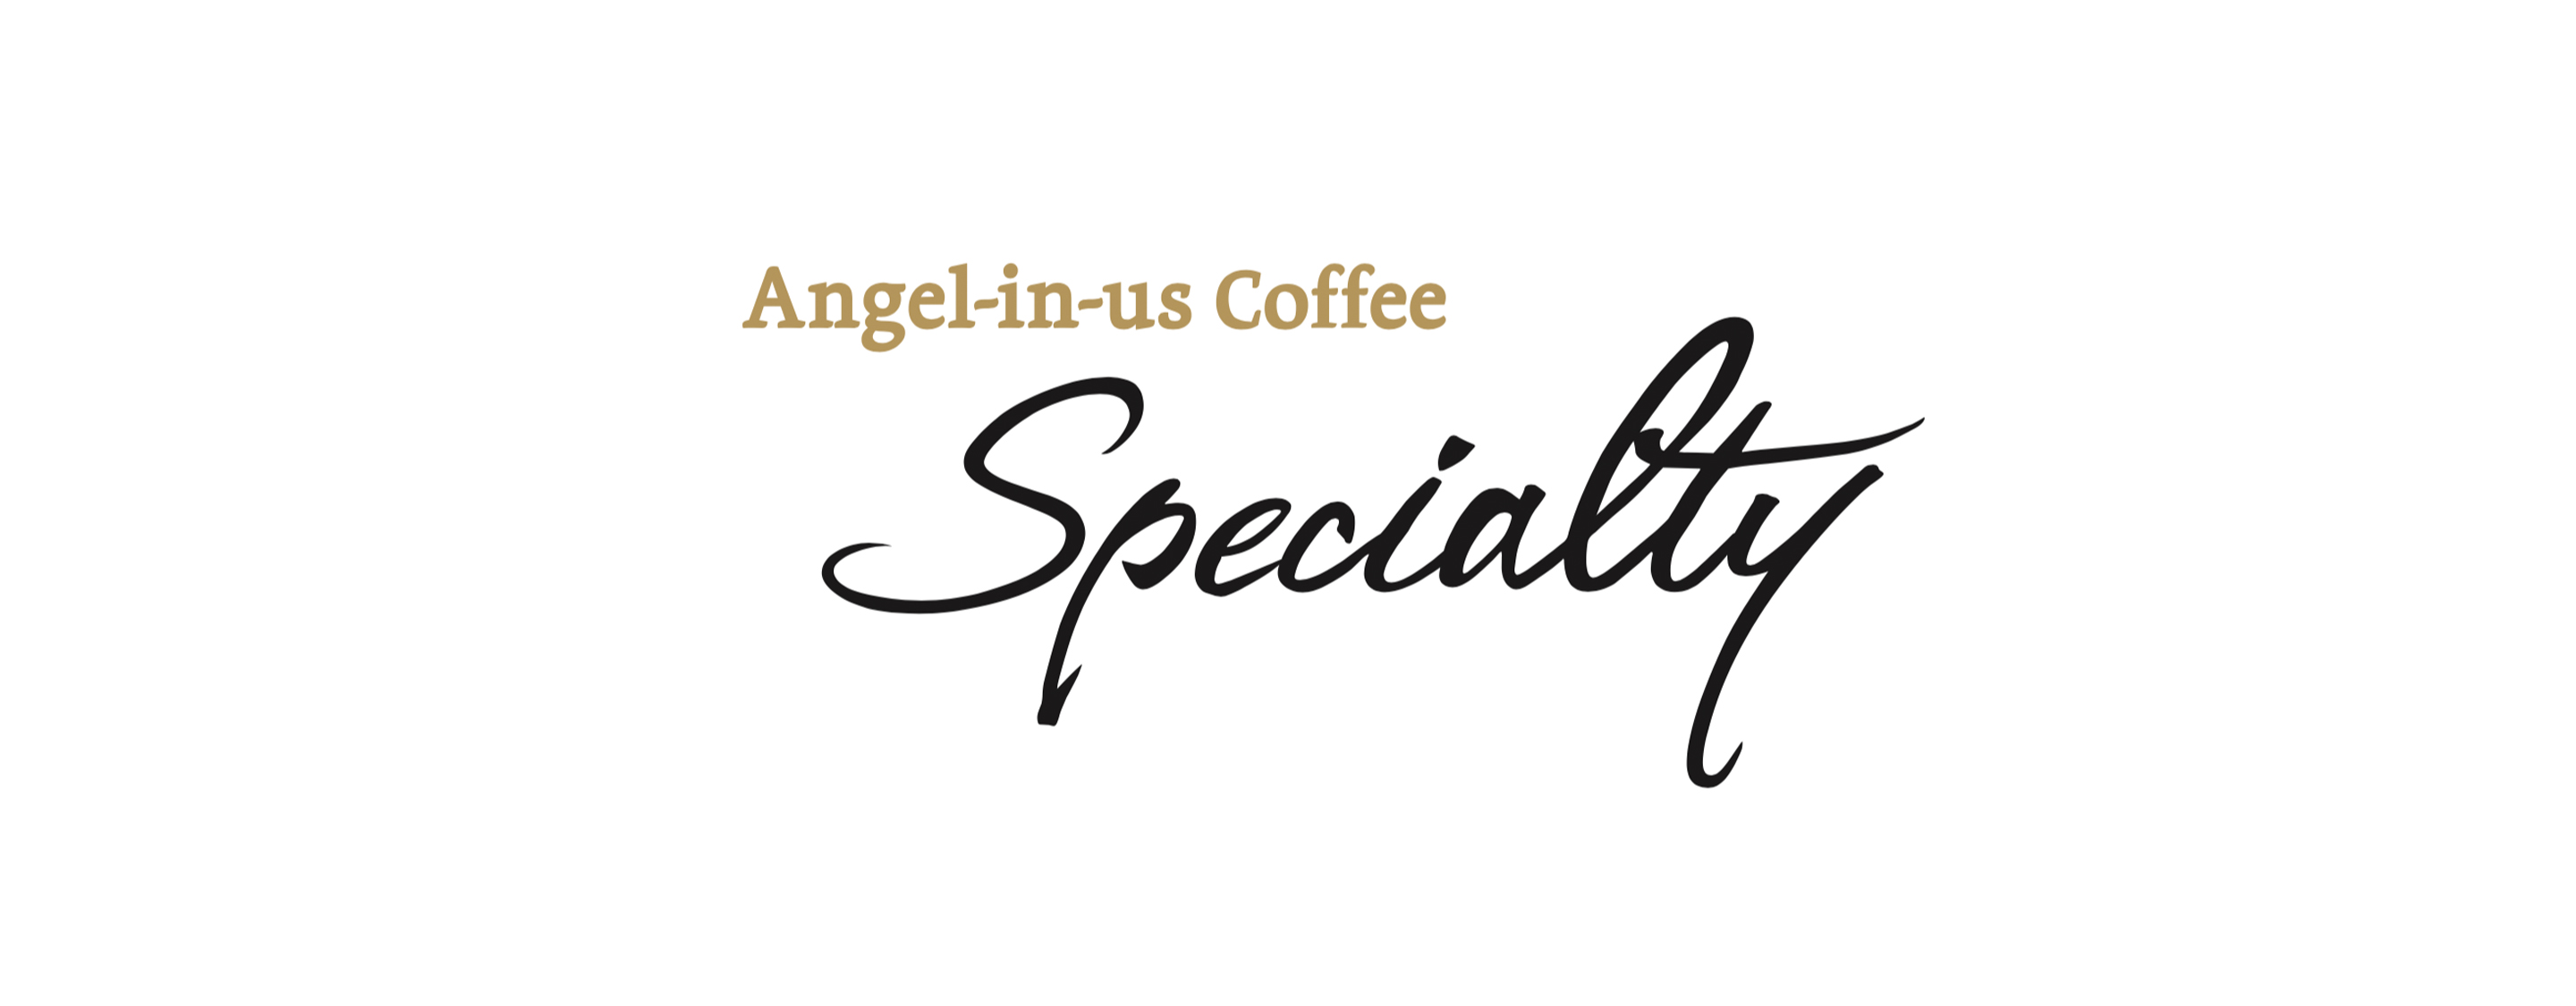  Angel-in-us Specialty